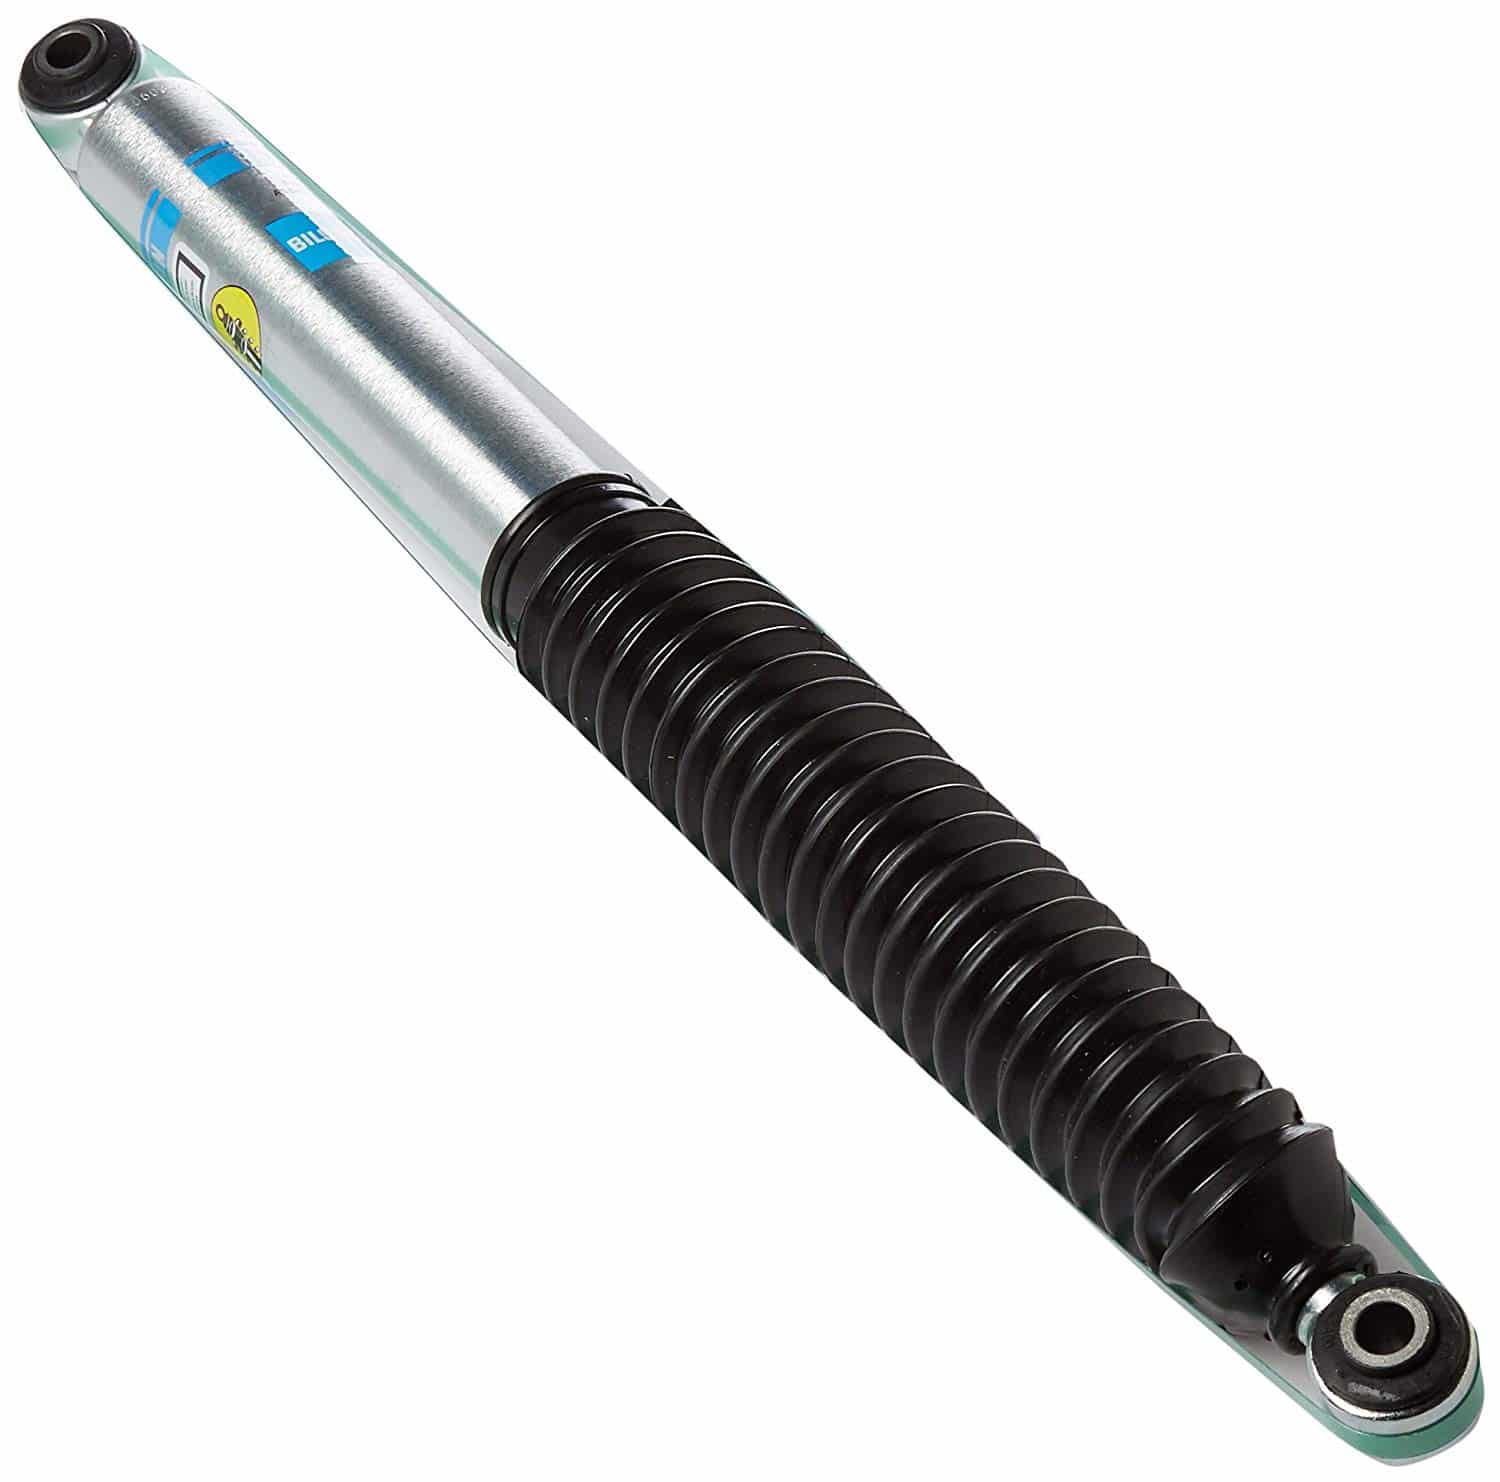 Best Replacement Shocks for Chevy Silverado